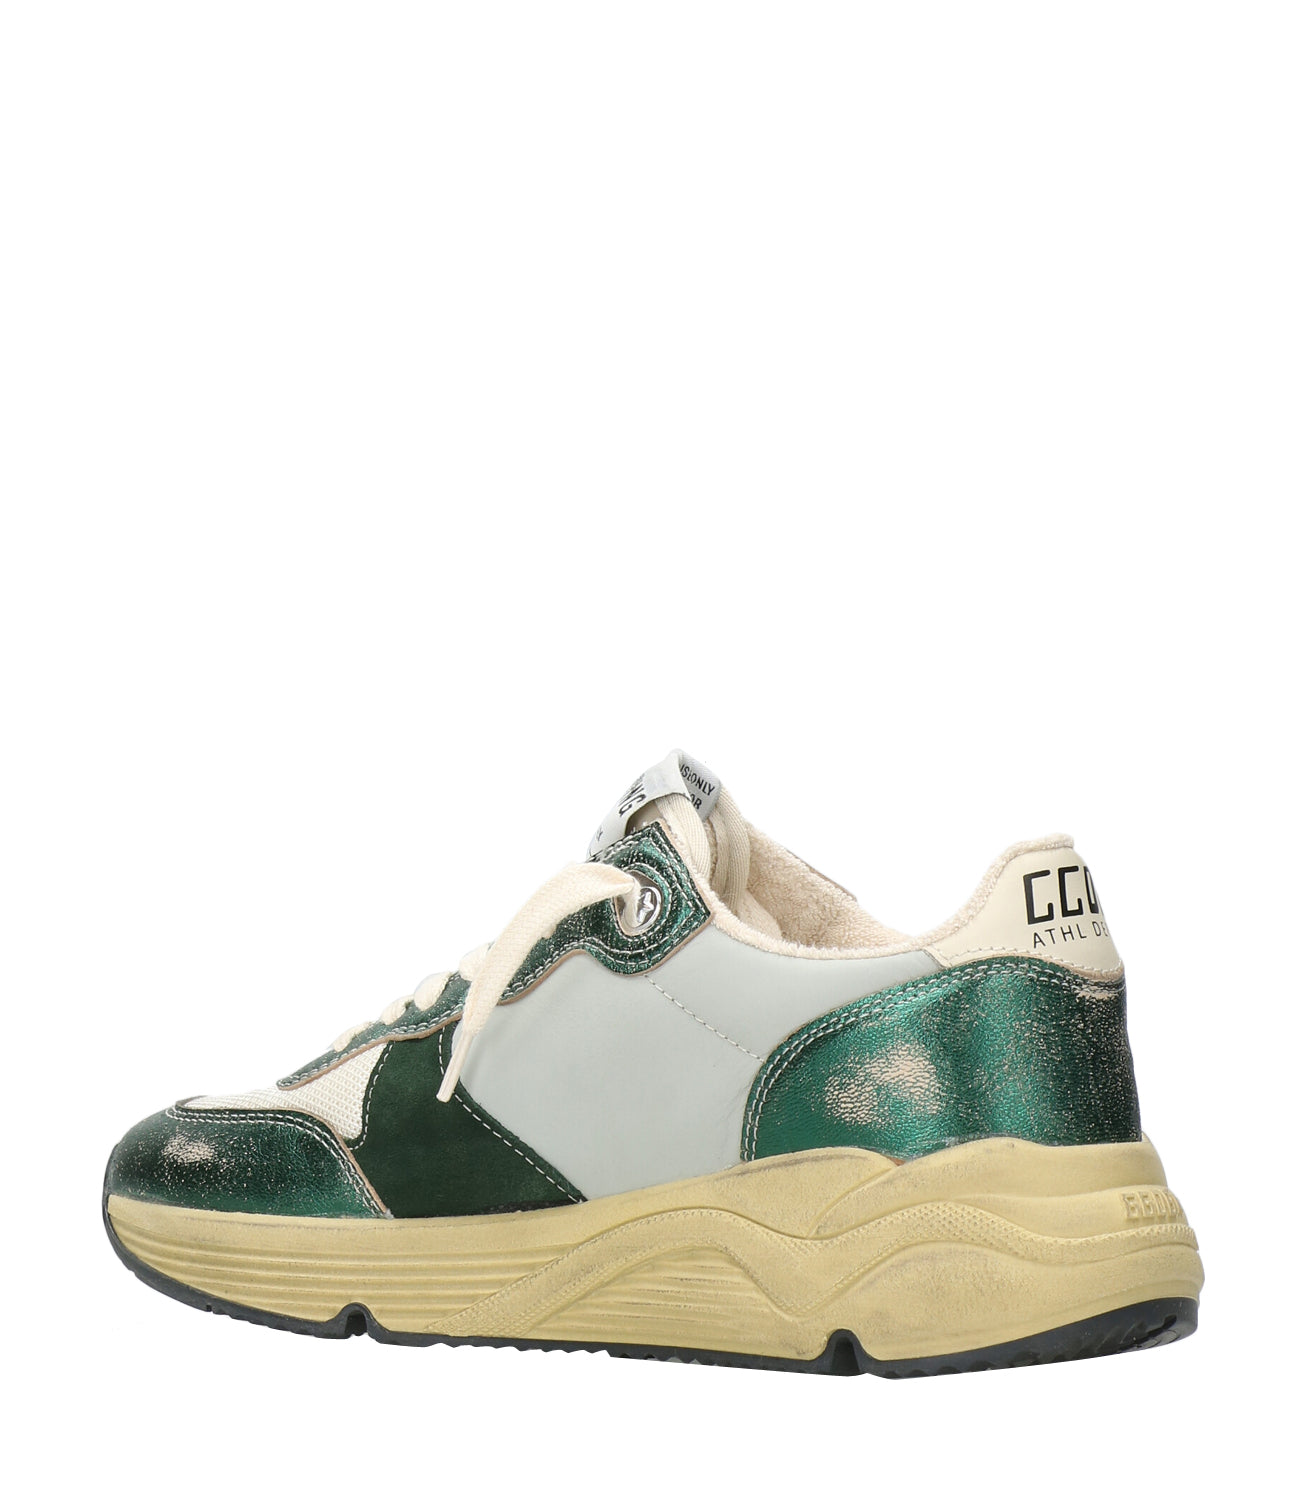 Golden Goose | Running Sole Sneakers Green, Cream and Silver